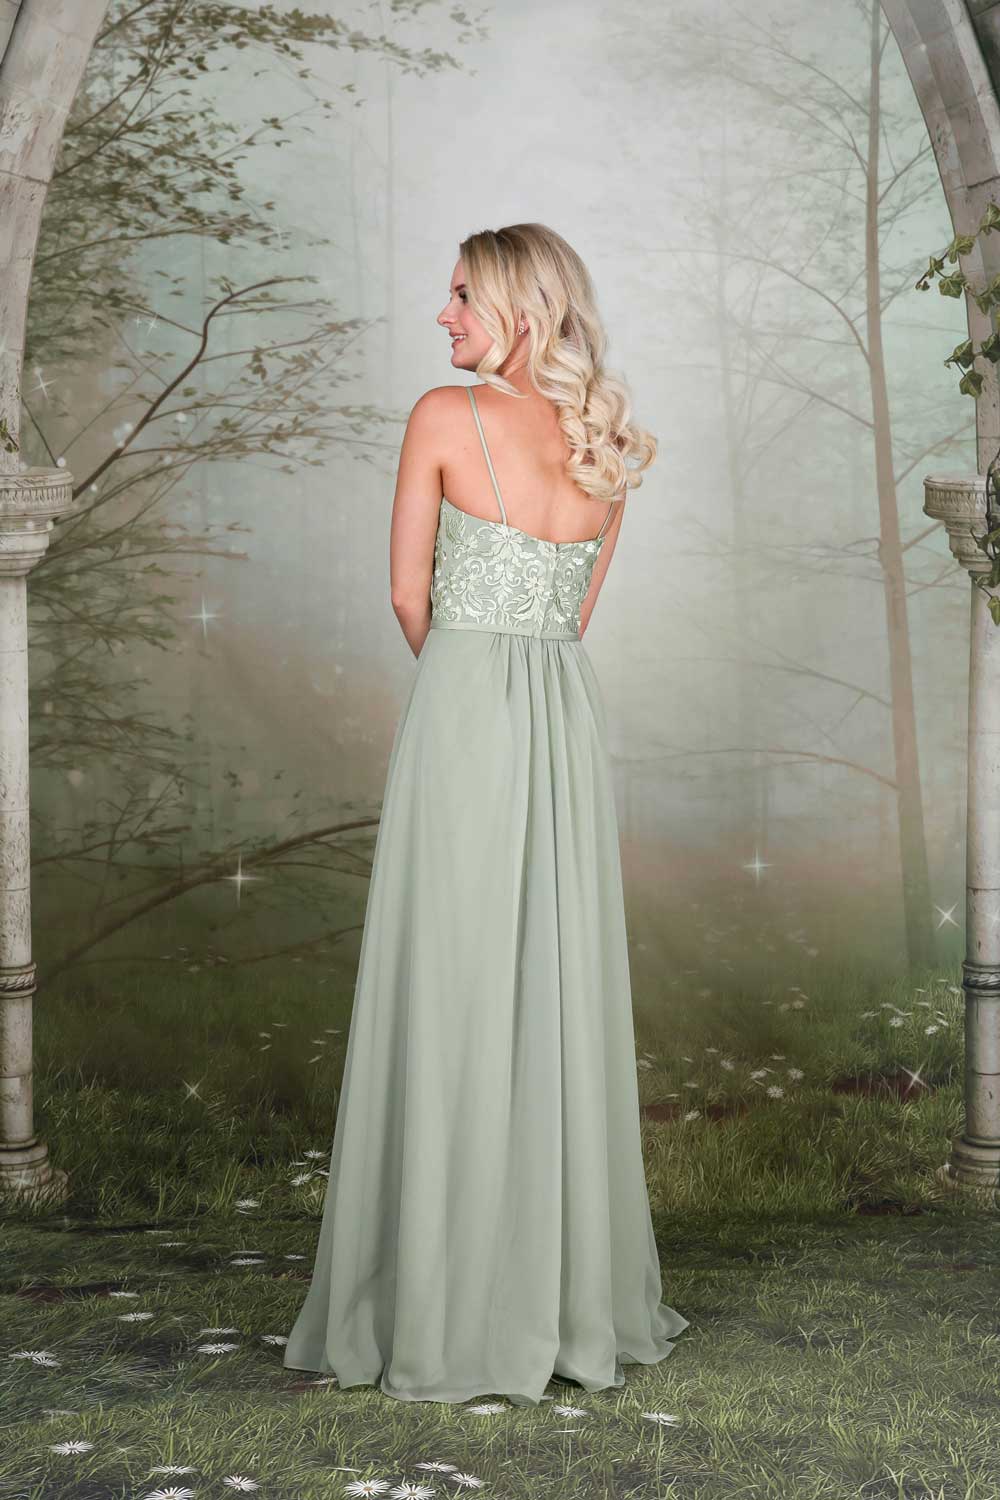 Bridesmaid dress with lace bodice and sweetheart neckline